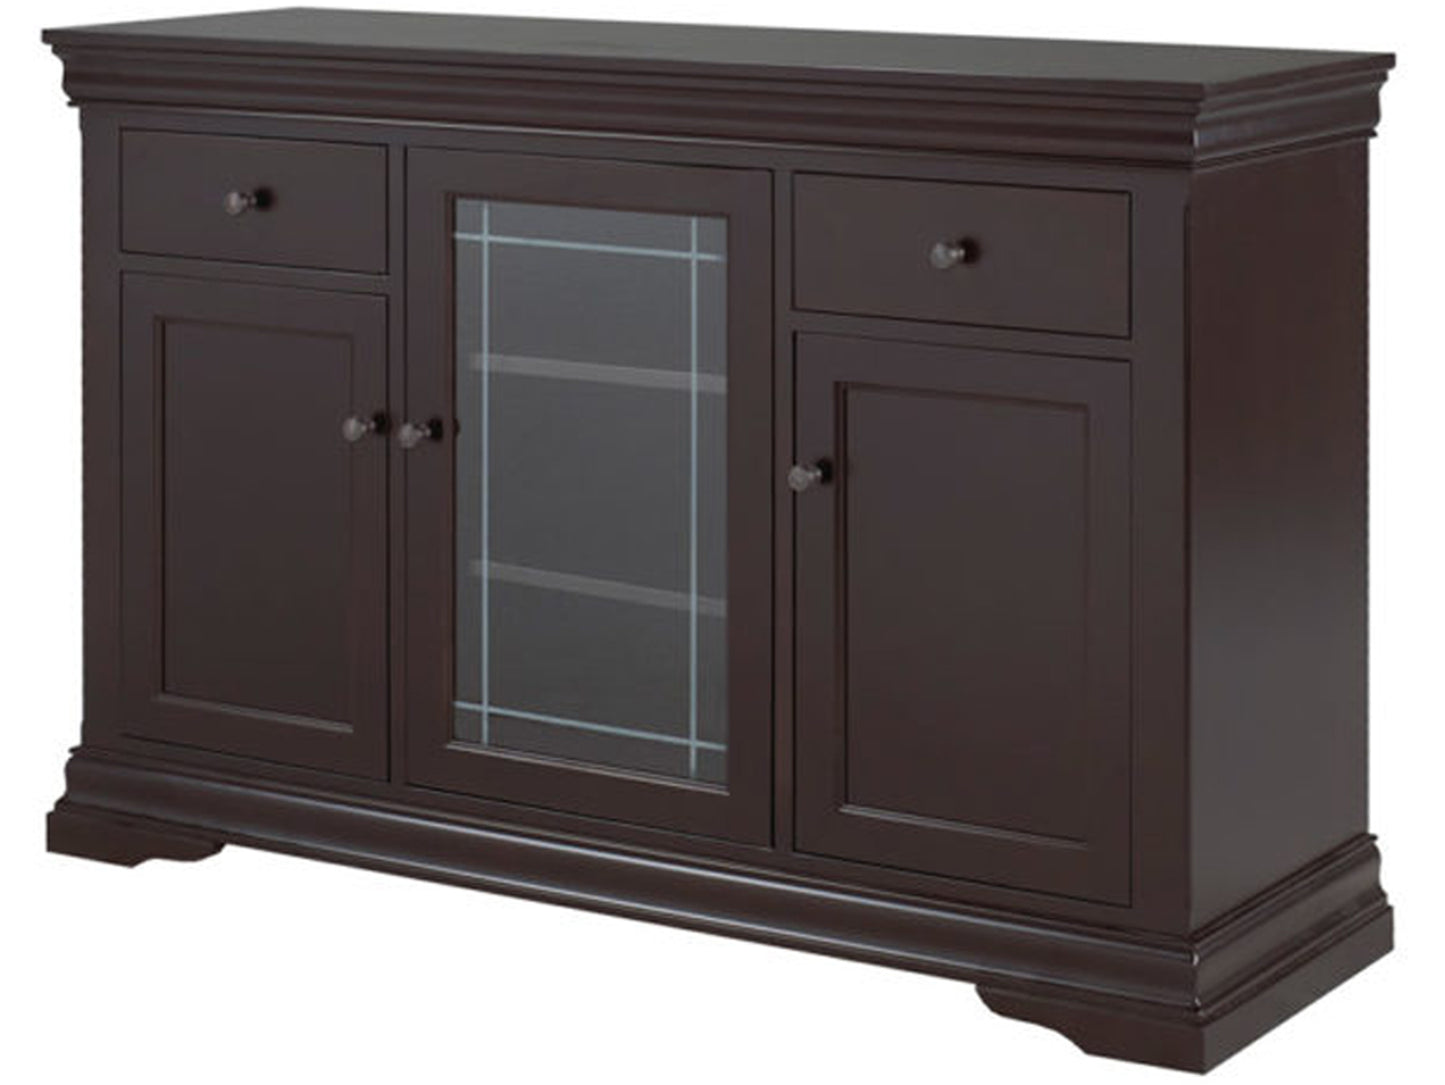 Empress sideboard - solid wood, Canadian made, custom made to order furniture|